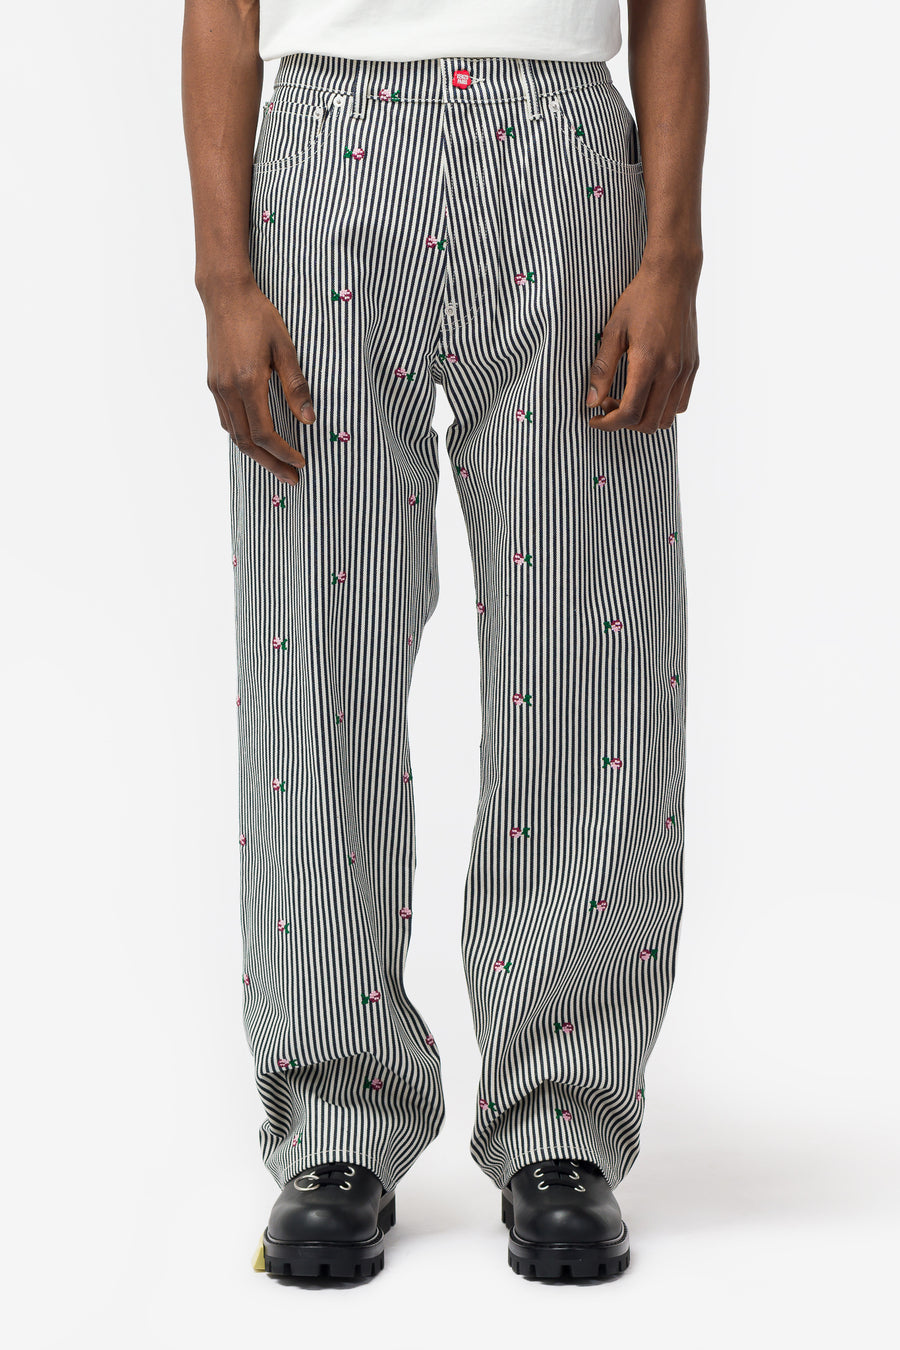 Marni Relaxed Striped Pants